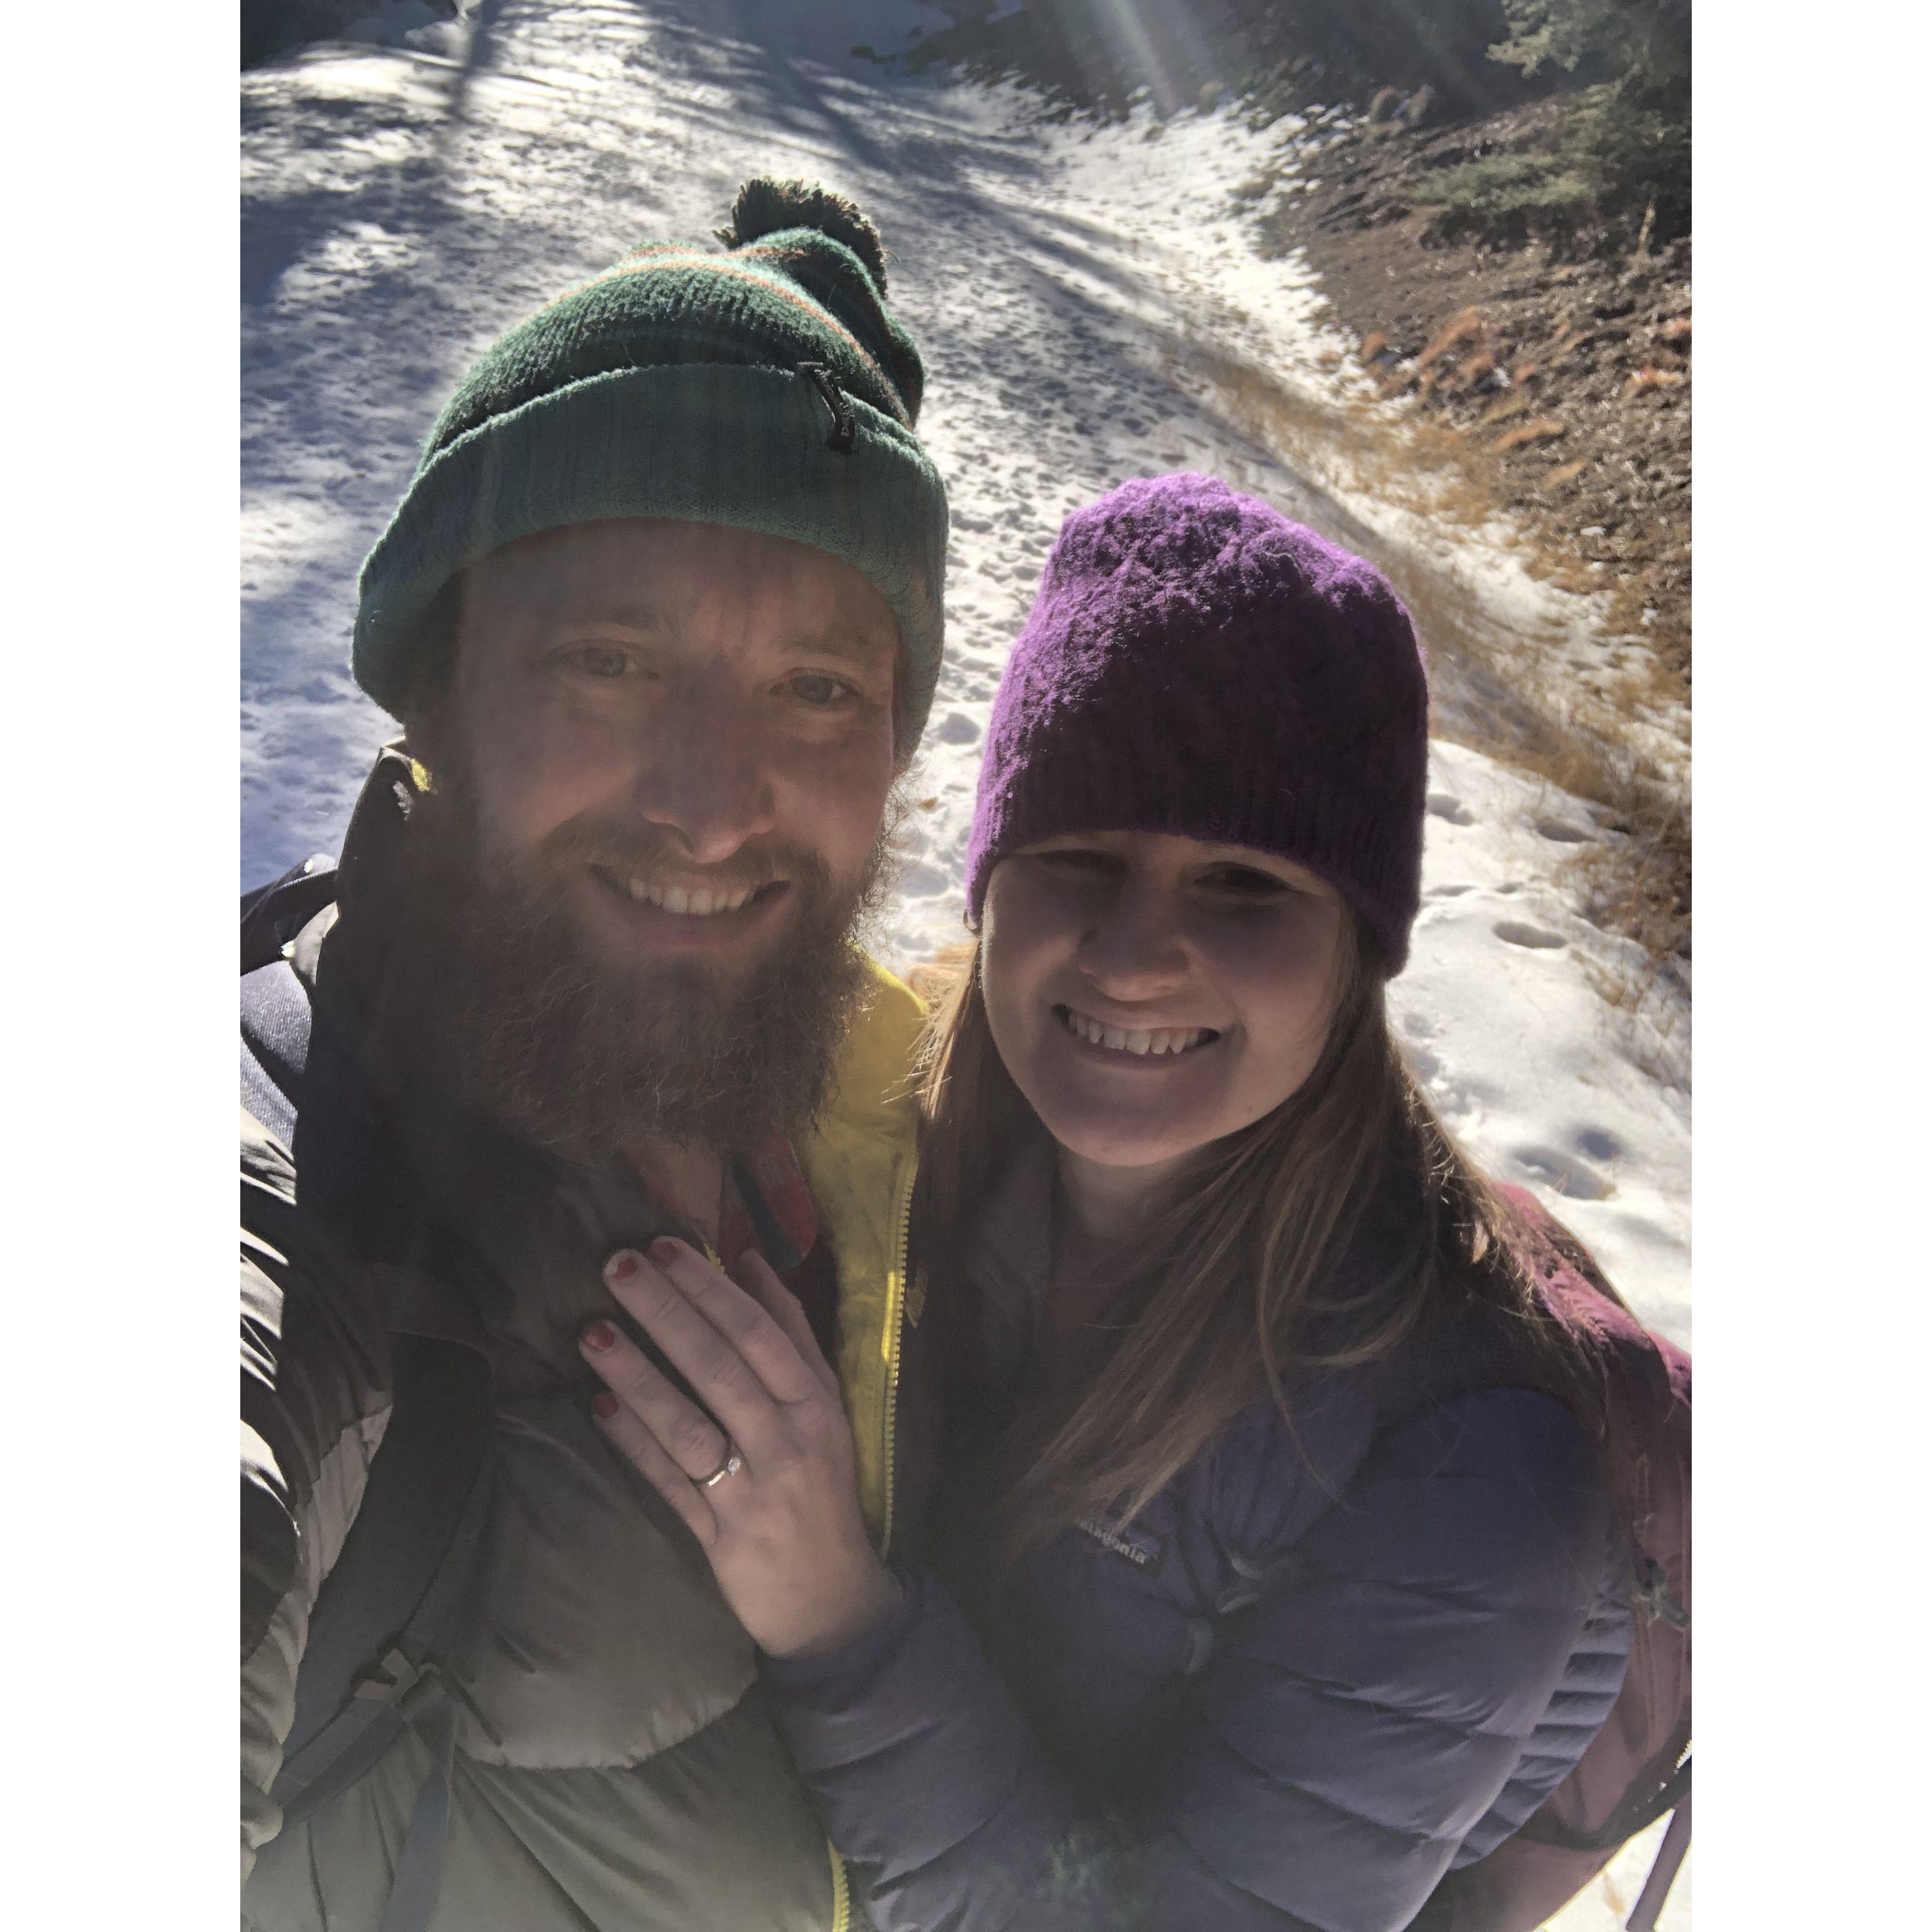 Wes's proposal! At Katy's favorite place in New Mexico (San Antonio Hot Springs)